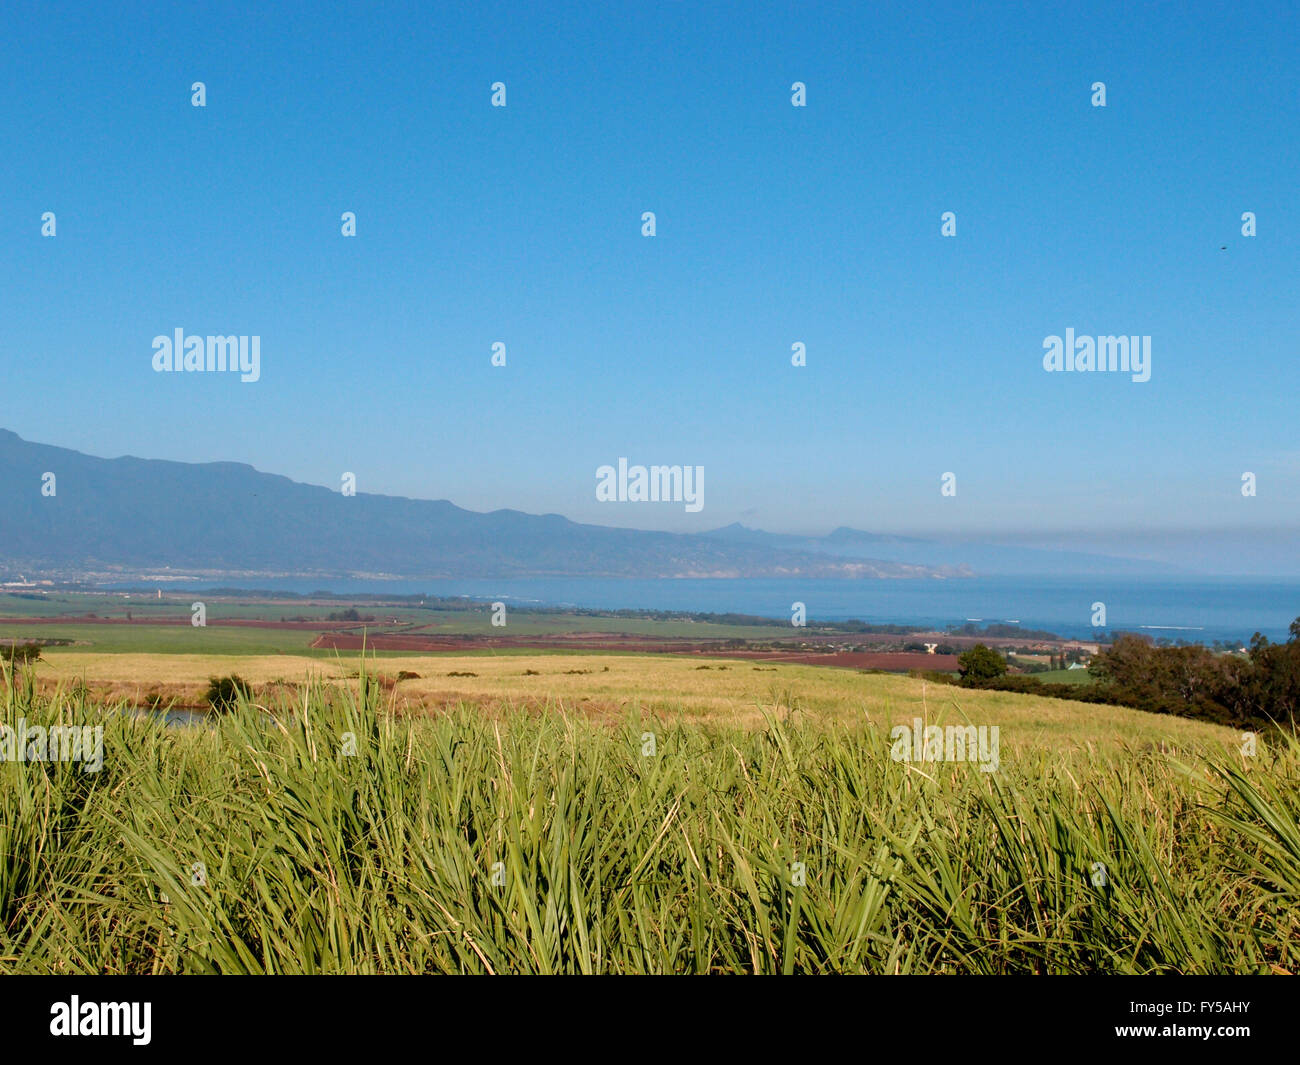 Maui Landscape view of sugarcane crops, mountains, coast, and ocean in Maui, Hawaii on as beautiful day. Stock Photo